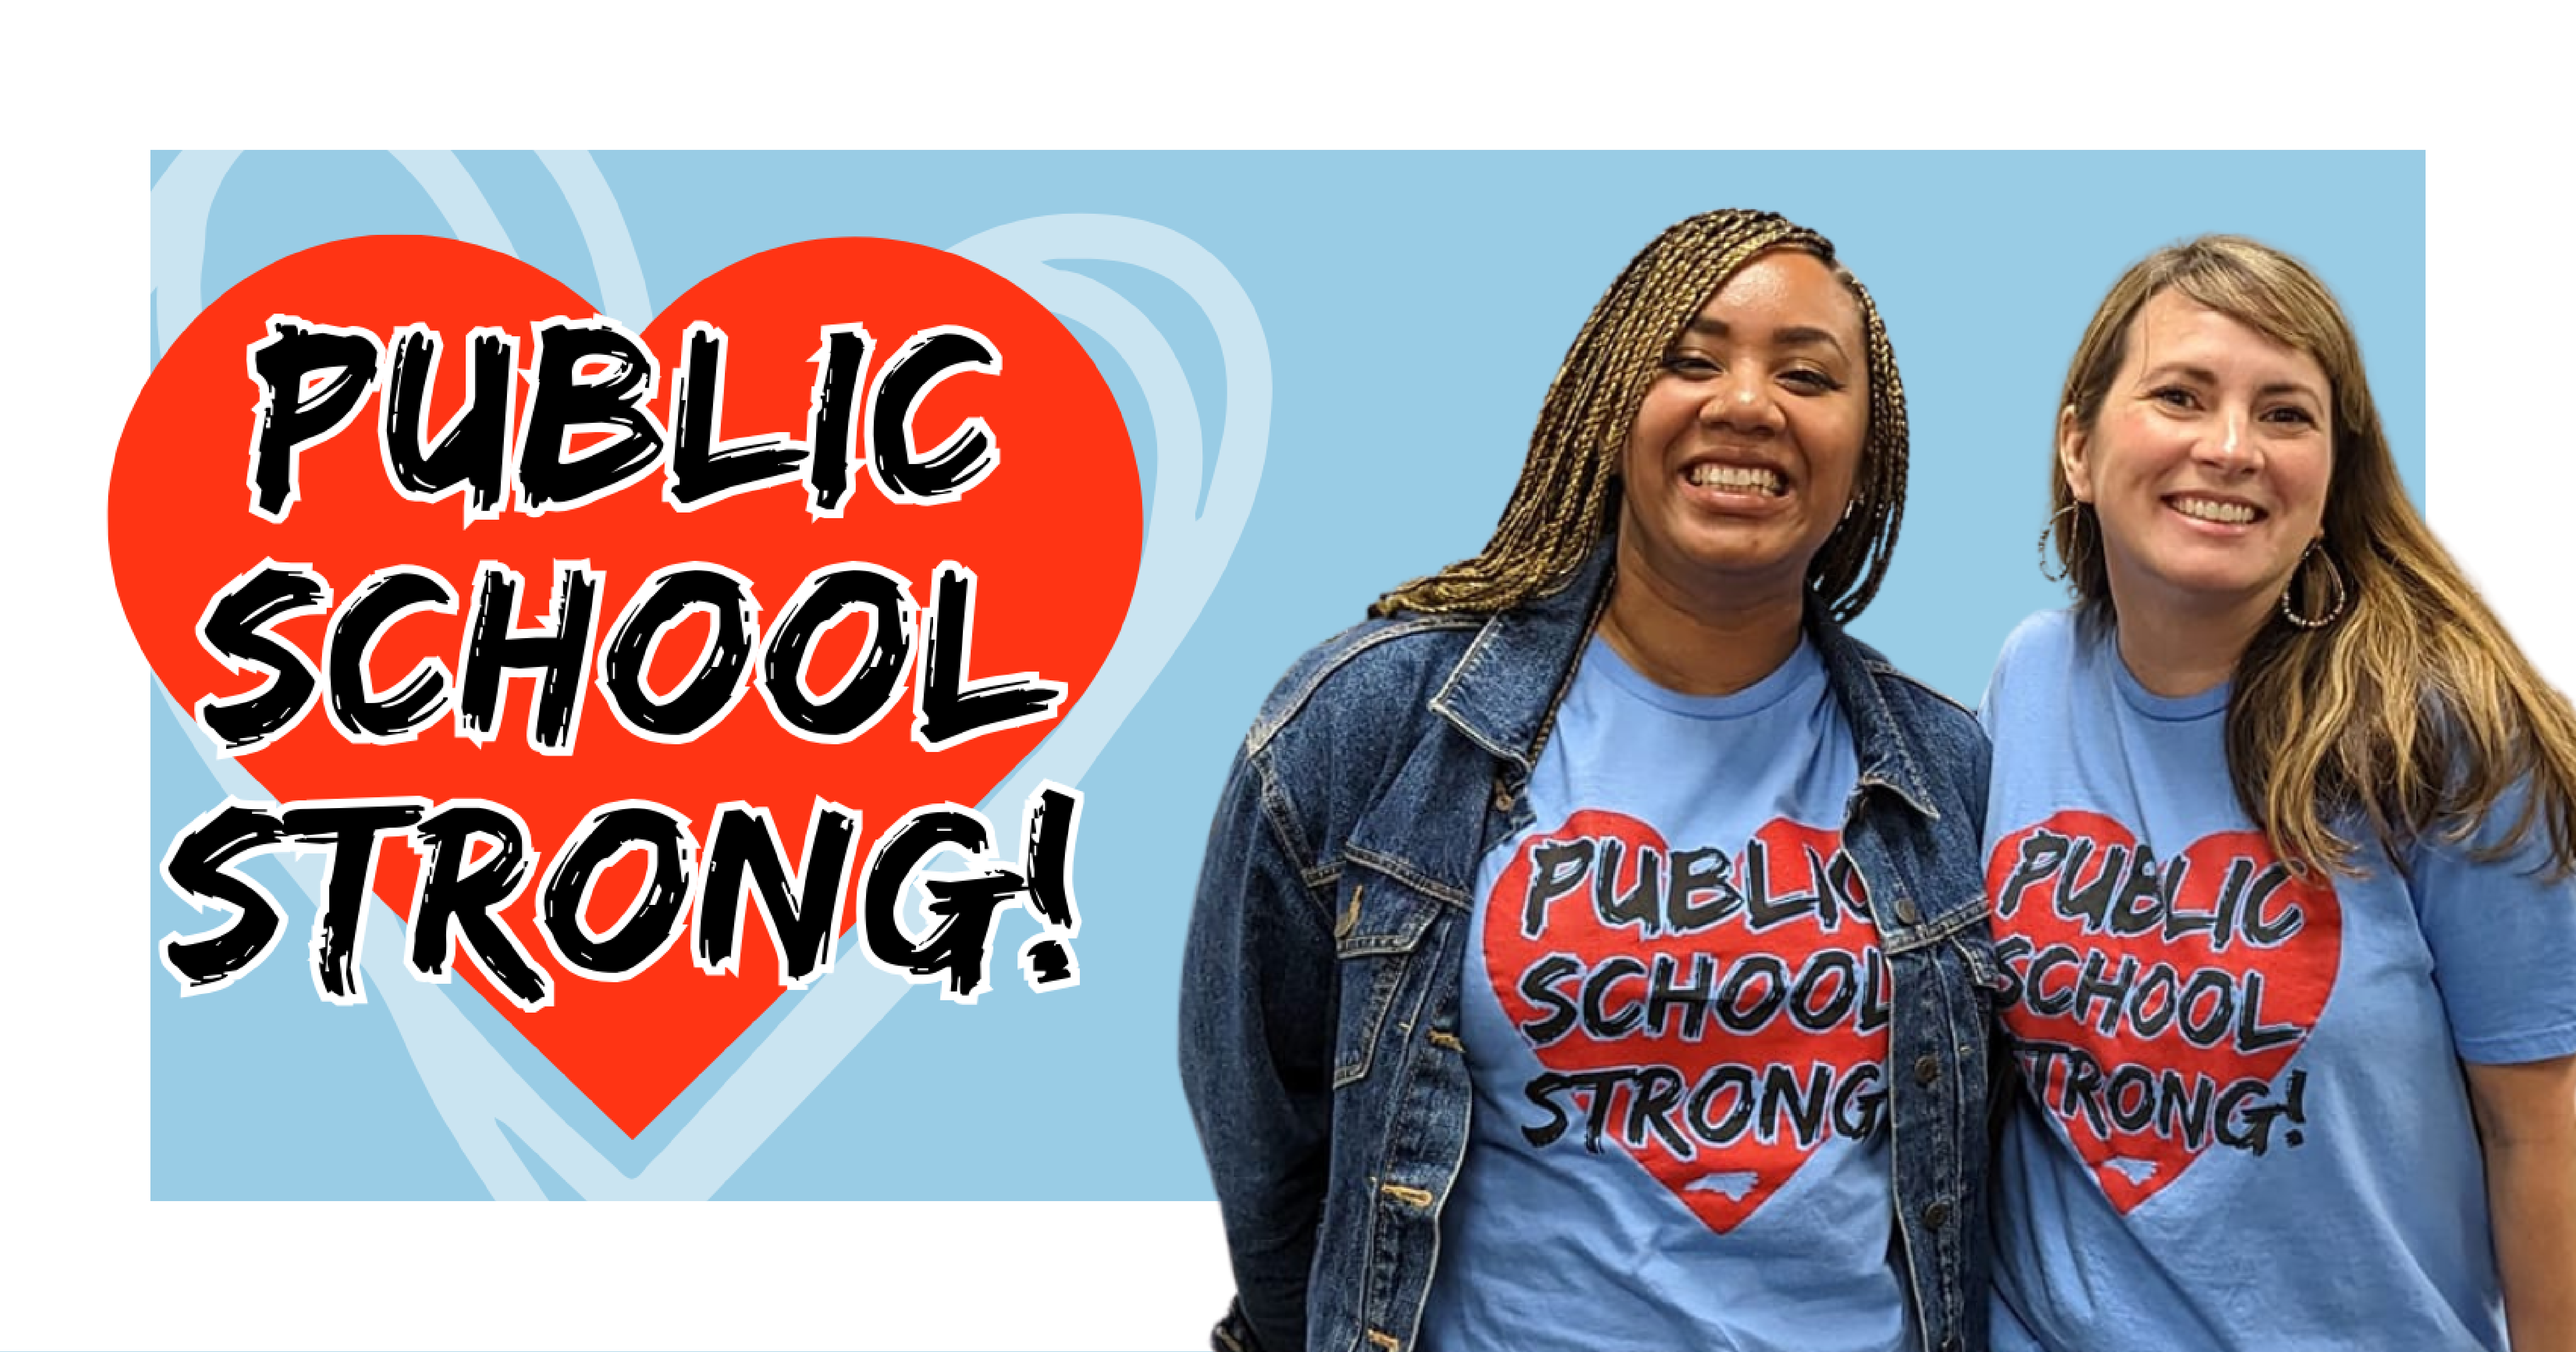 Public School Strong! copy over red heart with two outer tracings, against a baby blue background outlined by white. Two women – one Black with long, braided hair; one white with long, dark blonde hair – wearing Public School Strong shirts on the right.